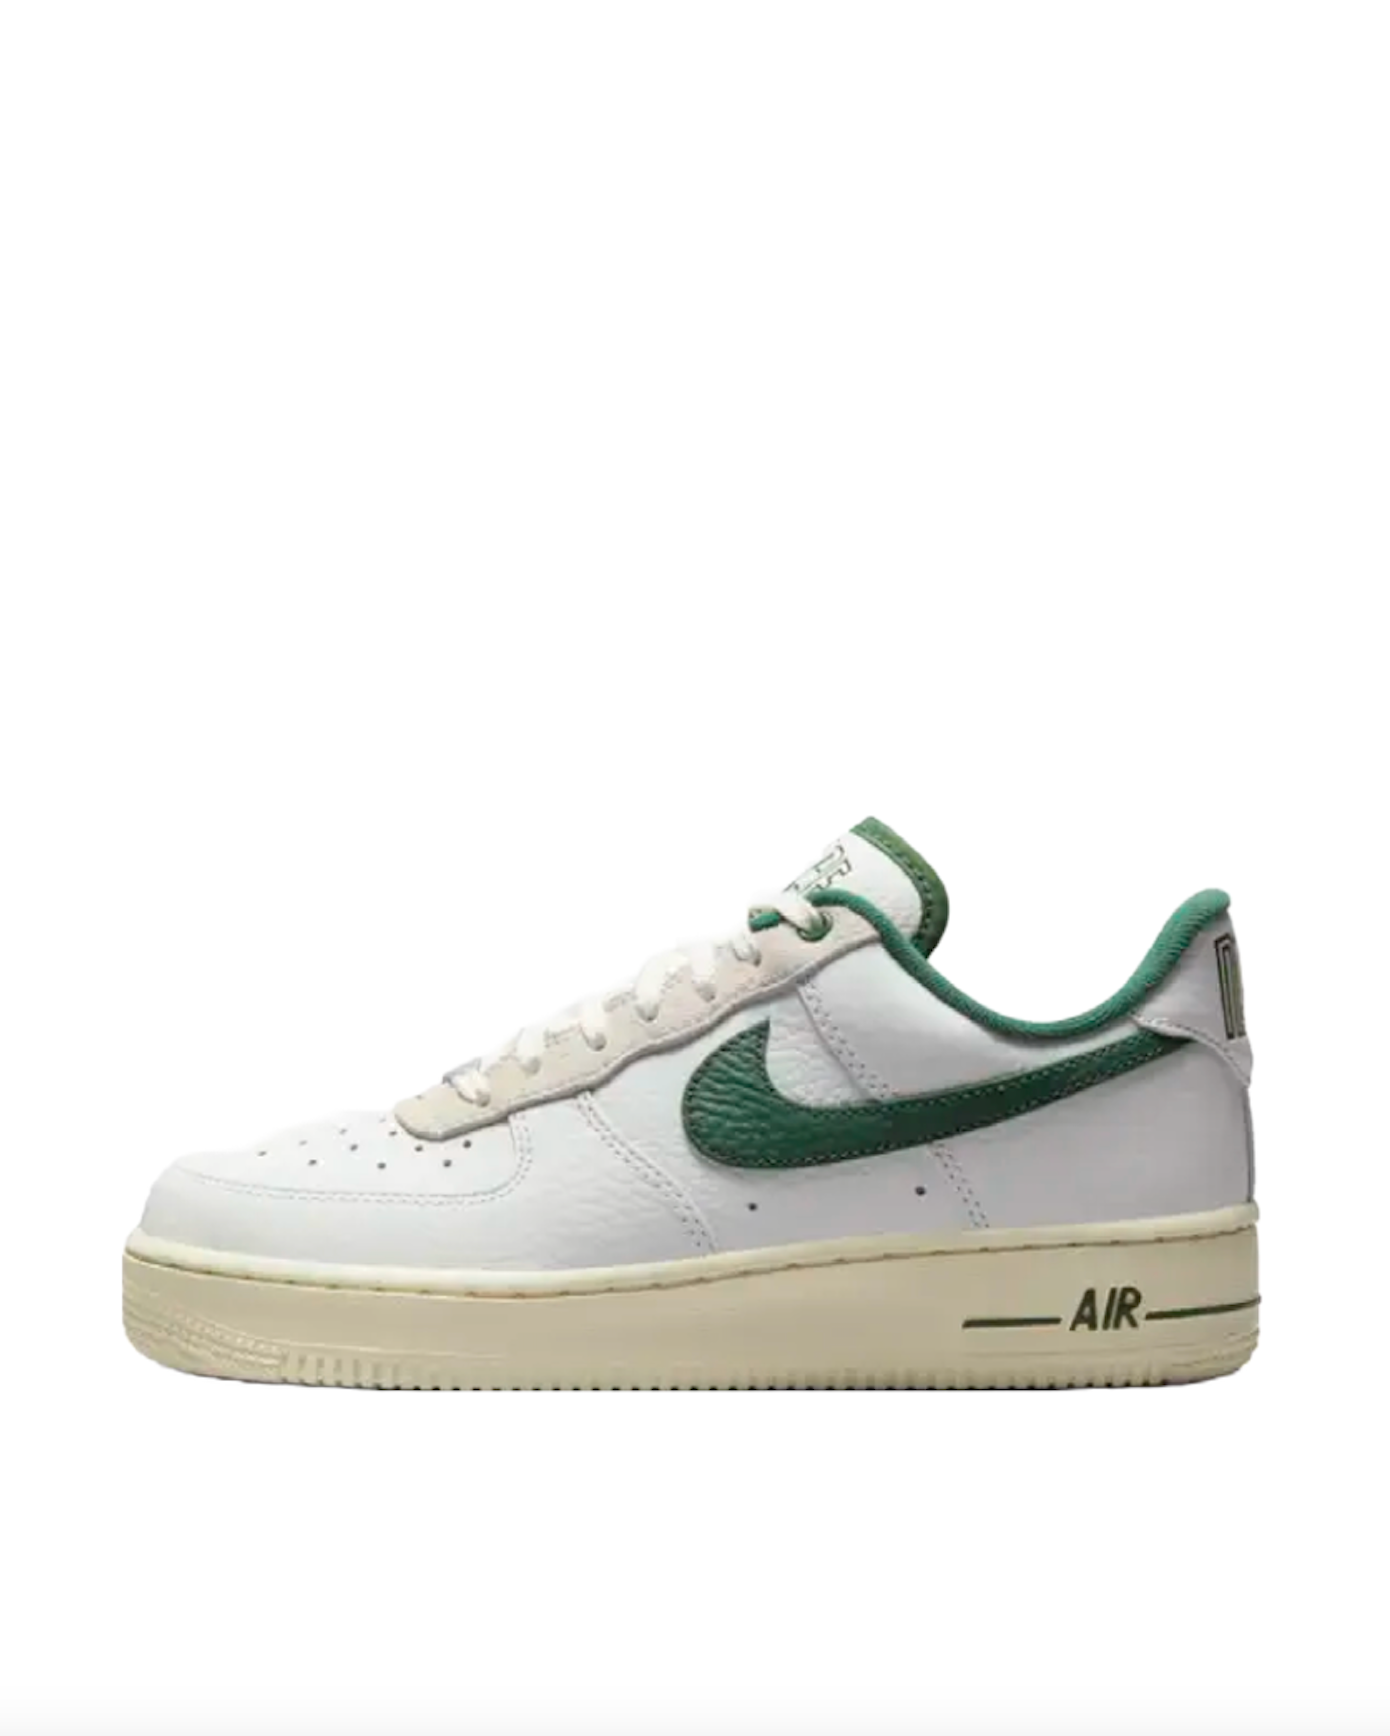 Women's Nike Air Force 1 '07 LX 'Summit White and Gorge Green'